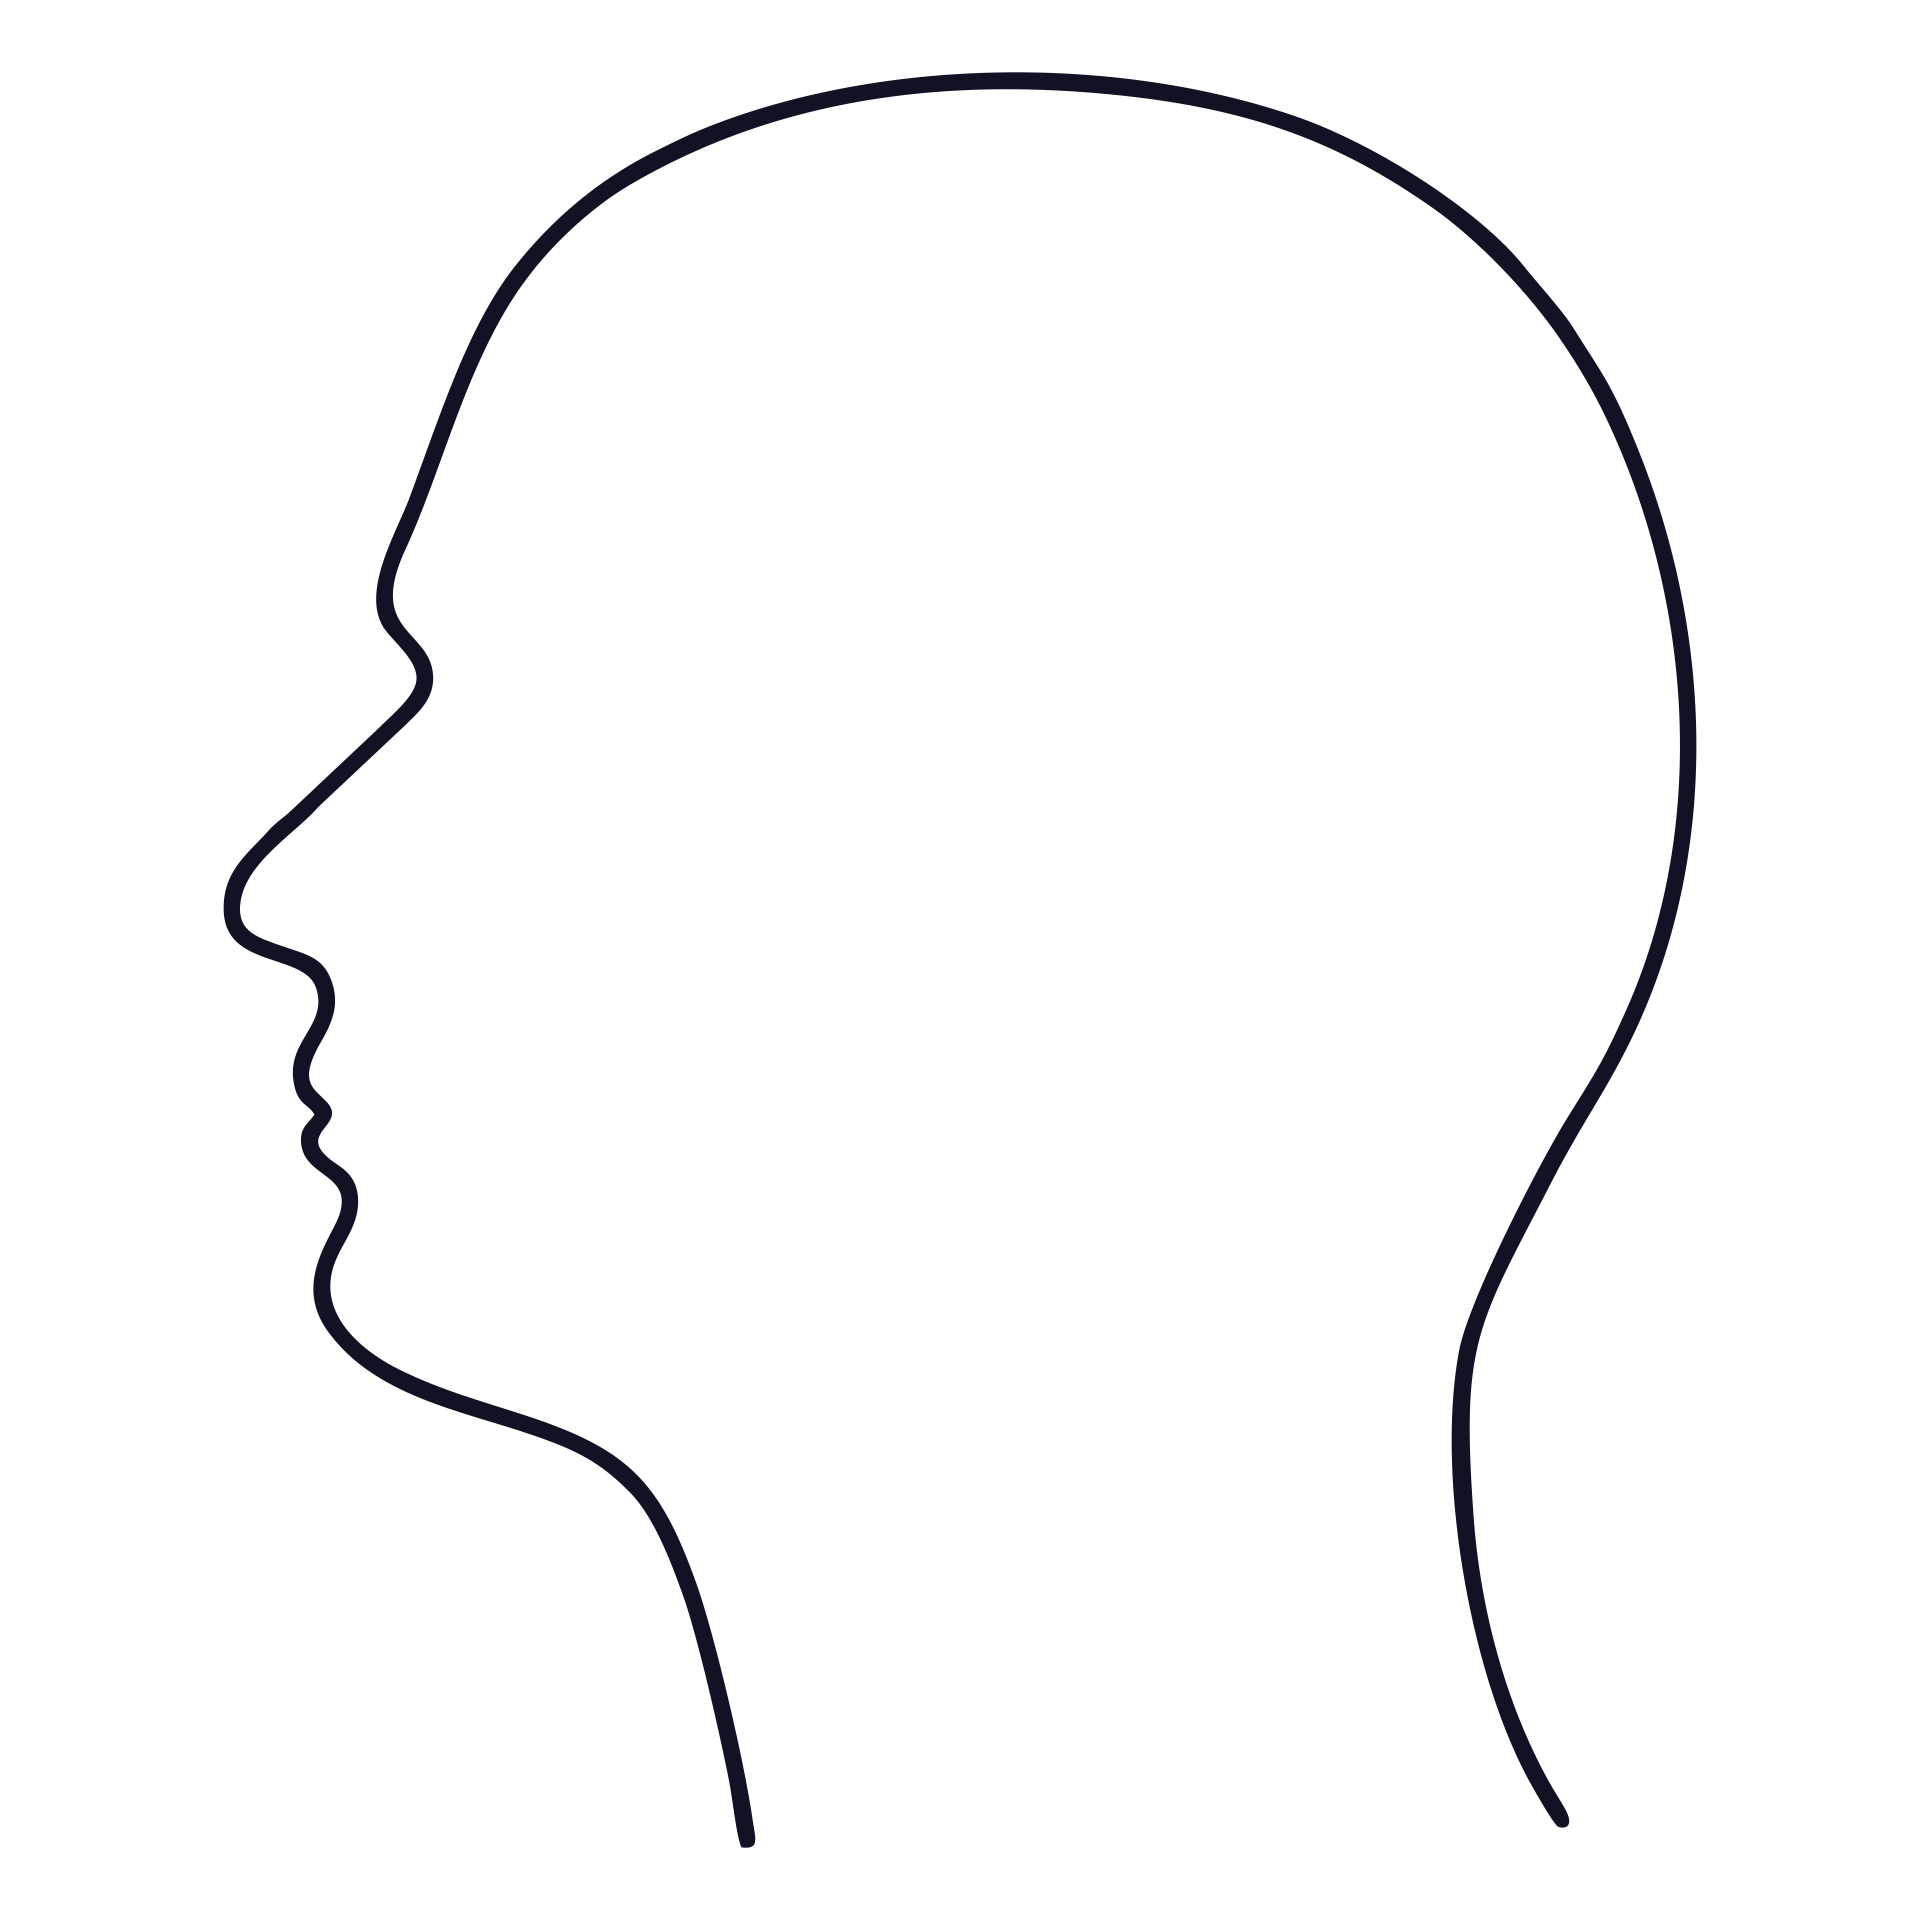 6 Best Images of Head Template Printable Human Head Outline Template